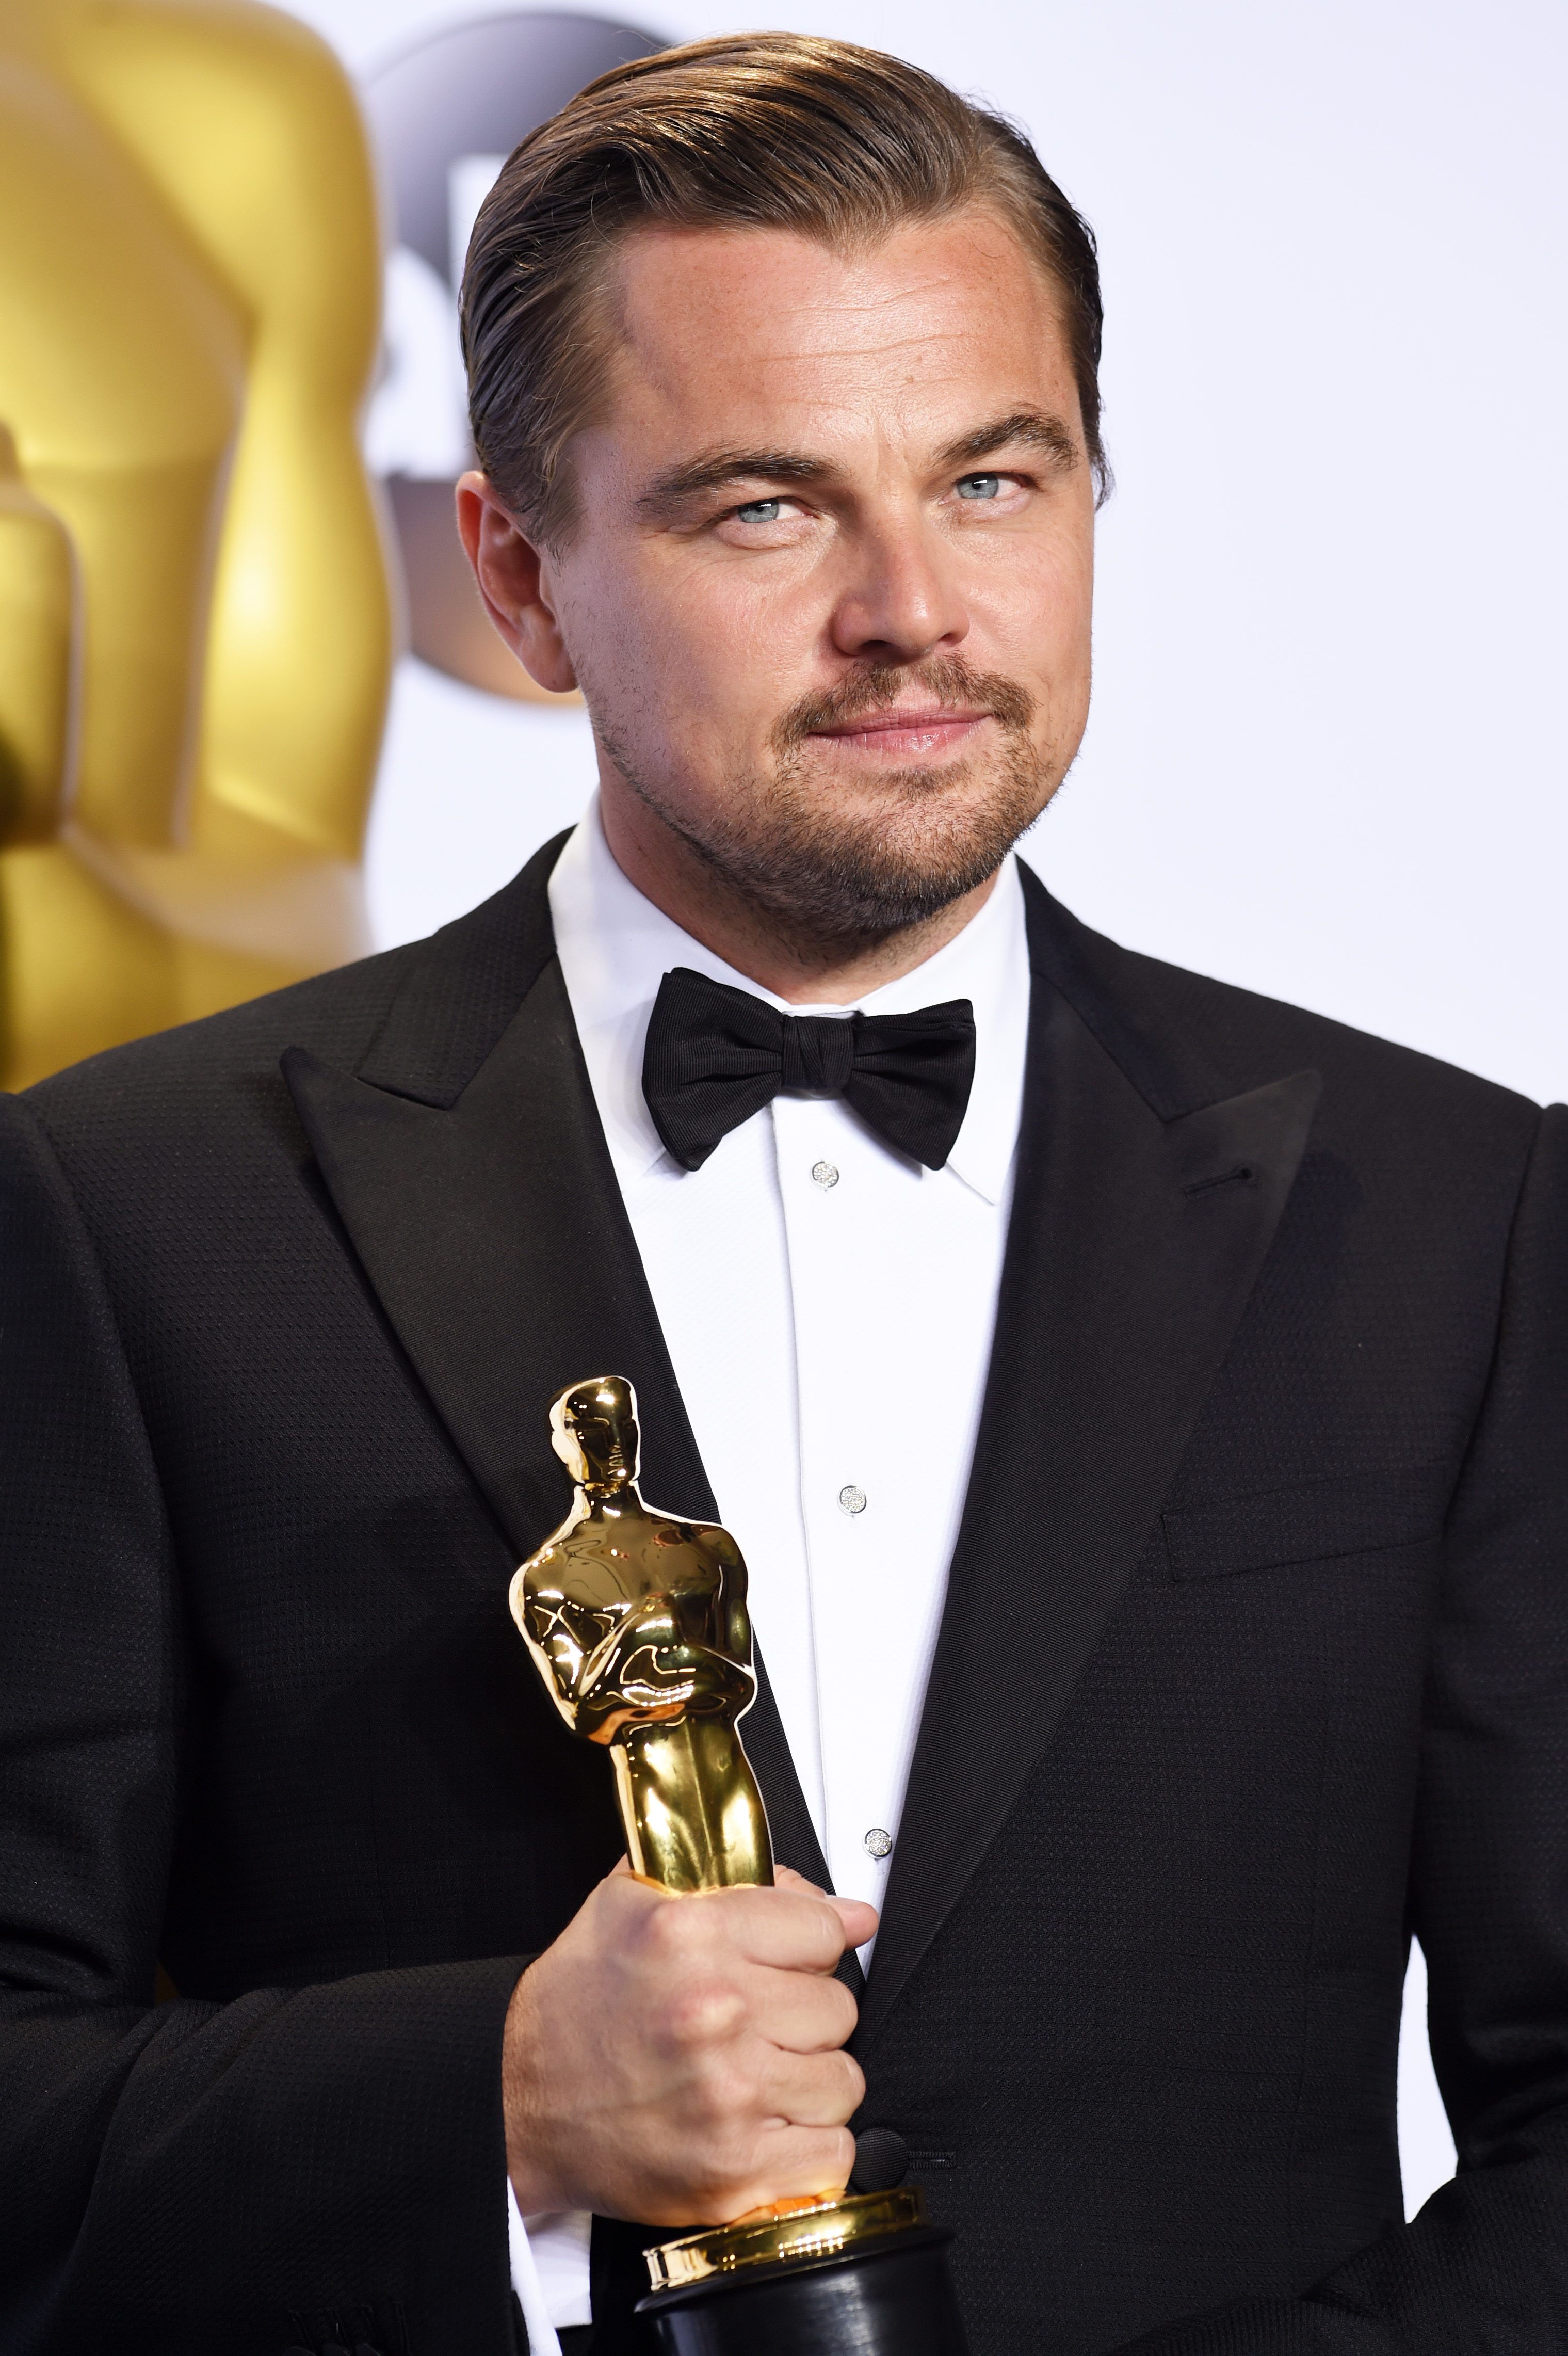 Mandatory Credit: Photo by David Fisher/Shutterstock (5599373ey) Leonardo DiCaprio - Performance by an Actor in a Leading Role, The Revenant 88th Annual Academy Awards, Press Room, Los Angeles, America - 28 Feb 2016